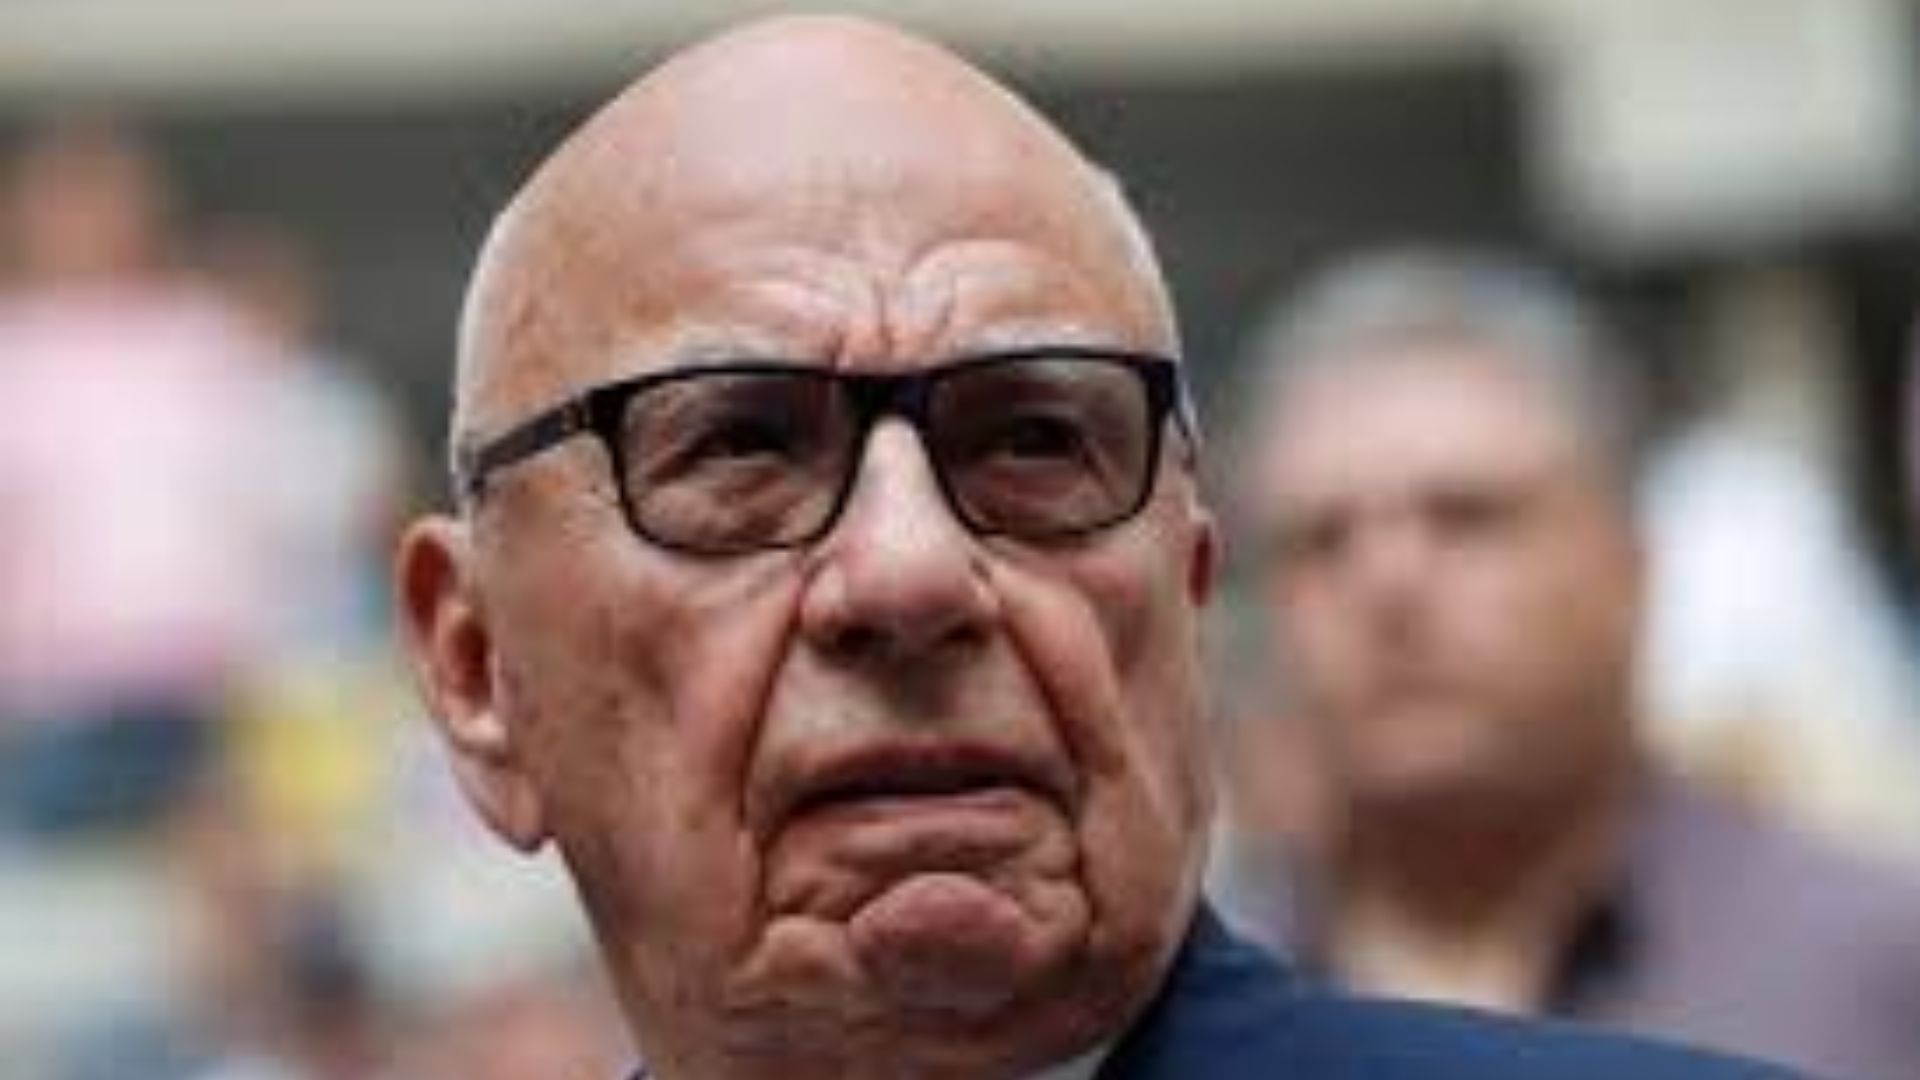 Media Tycoon Rupert Murdoch Weds for Fifth Time